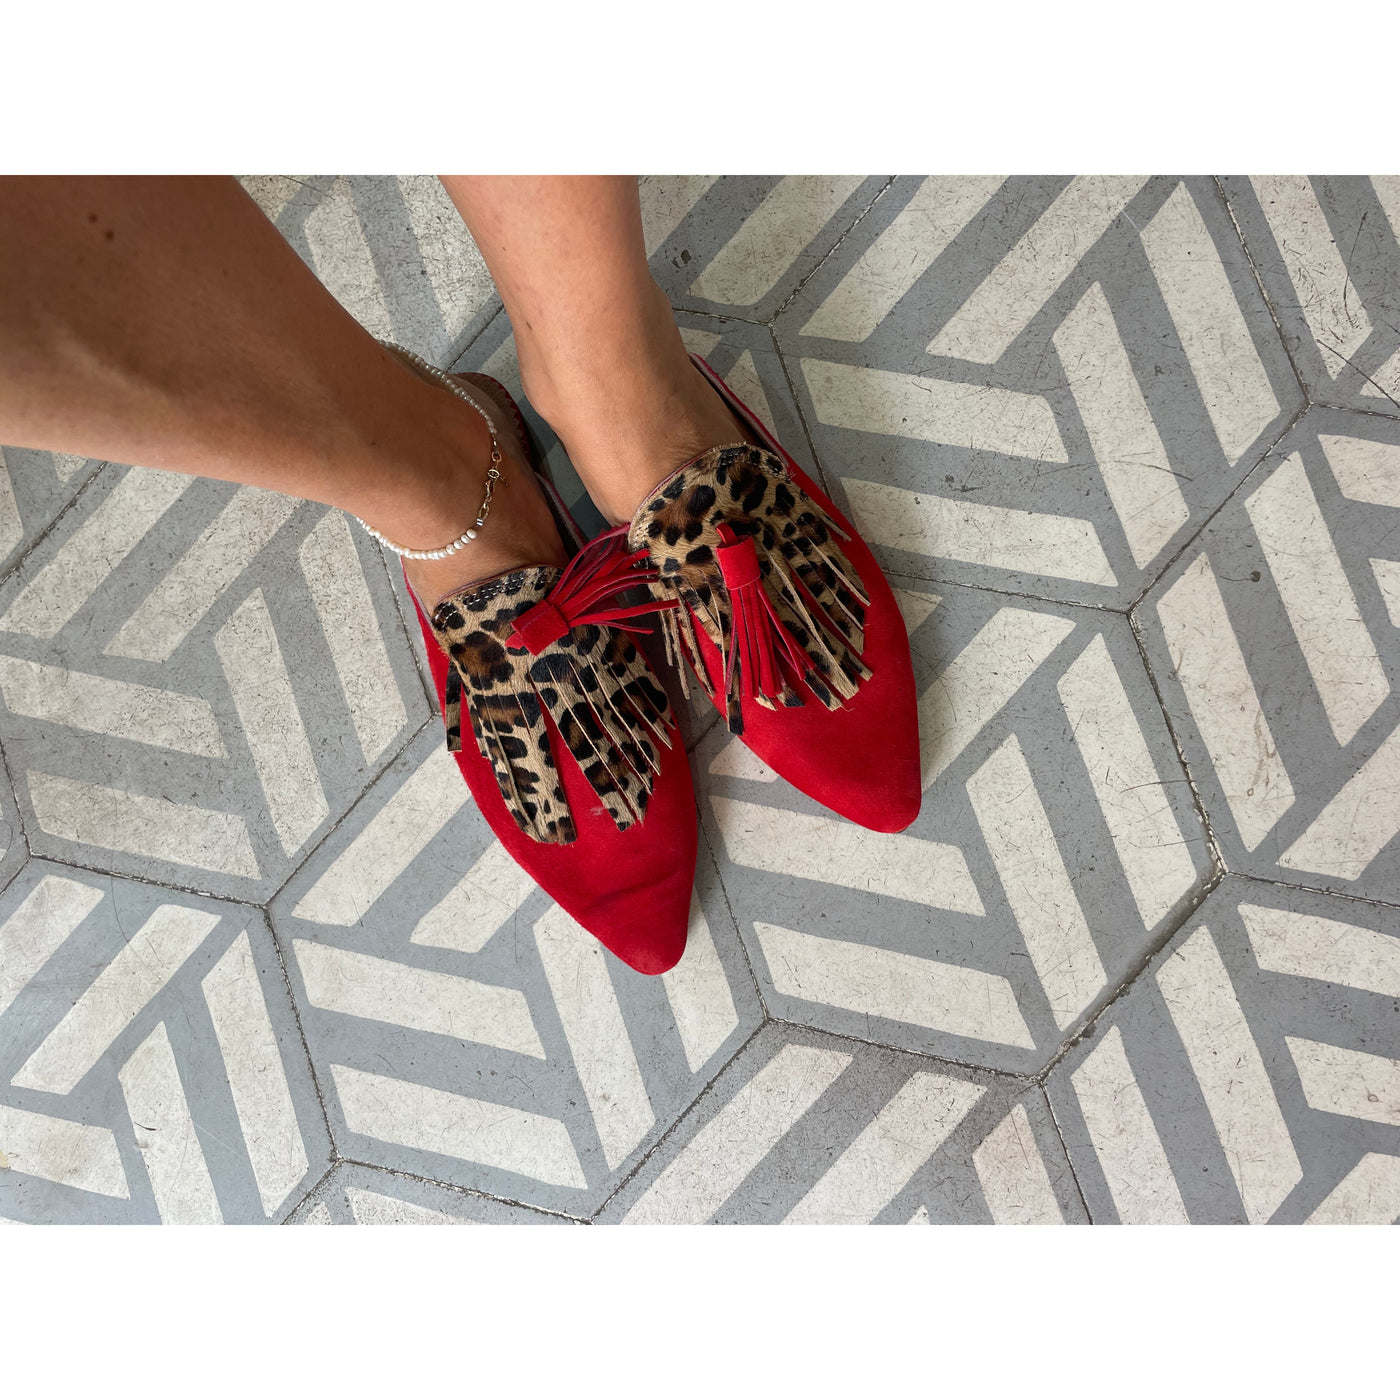 Marrakesh chic red shoes